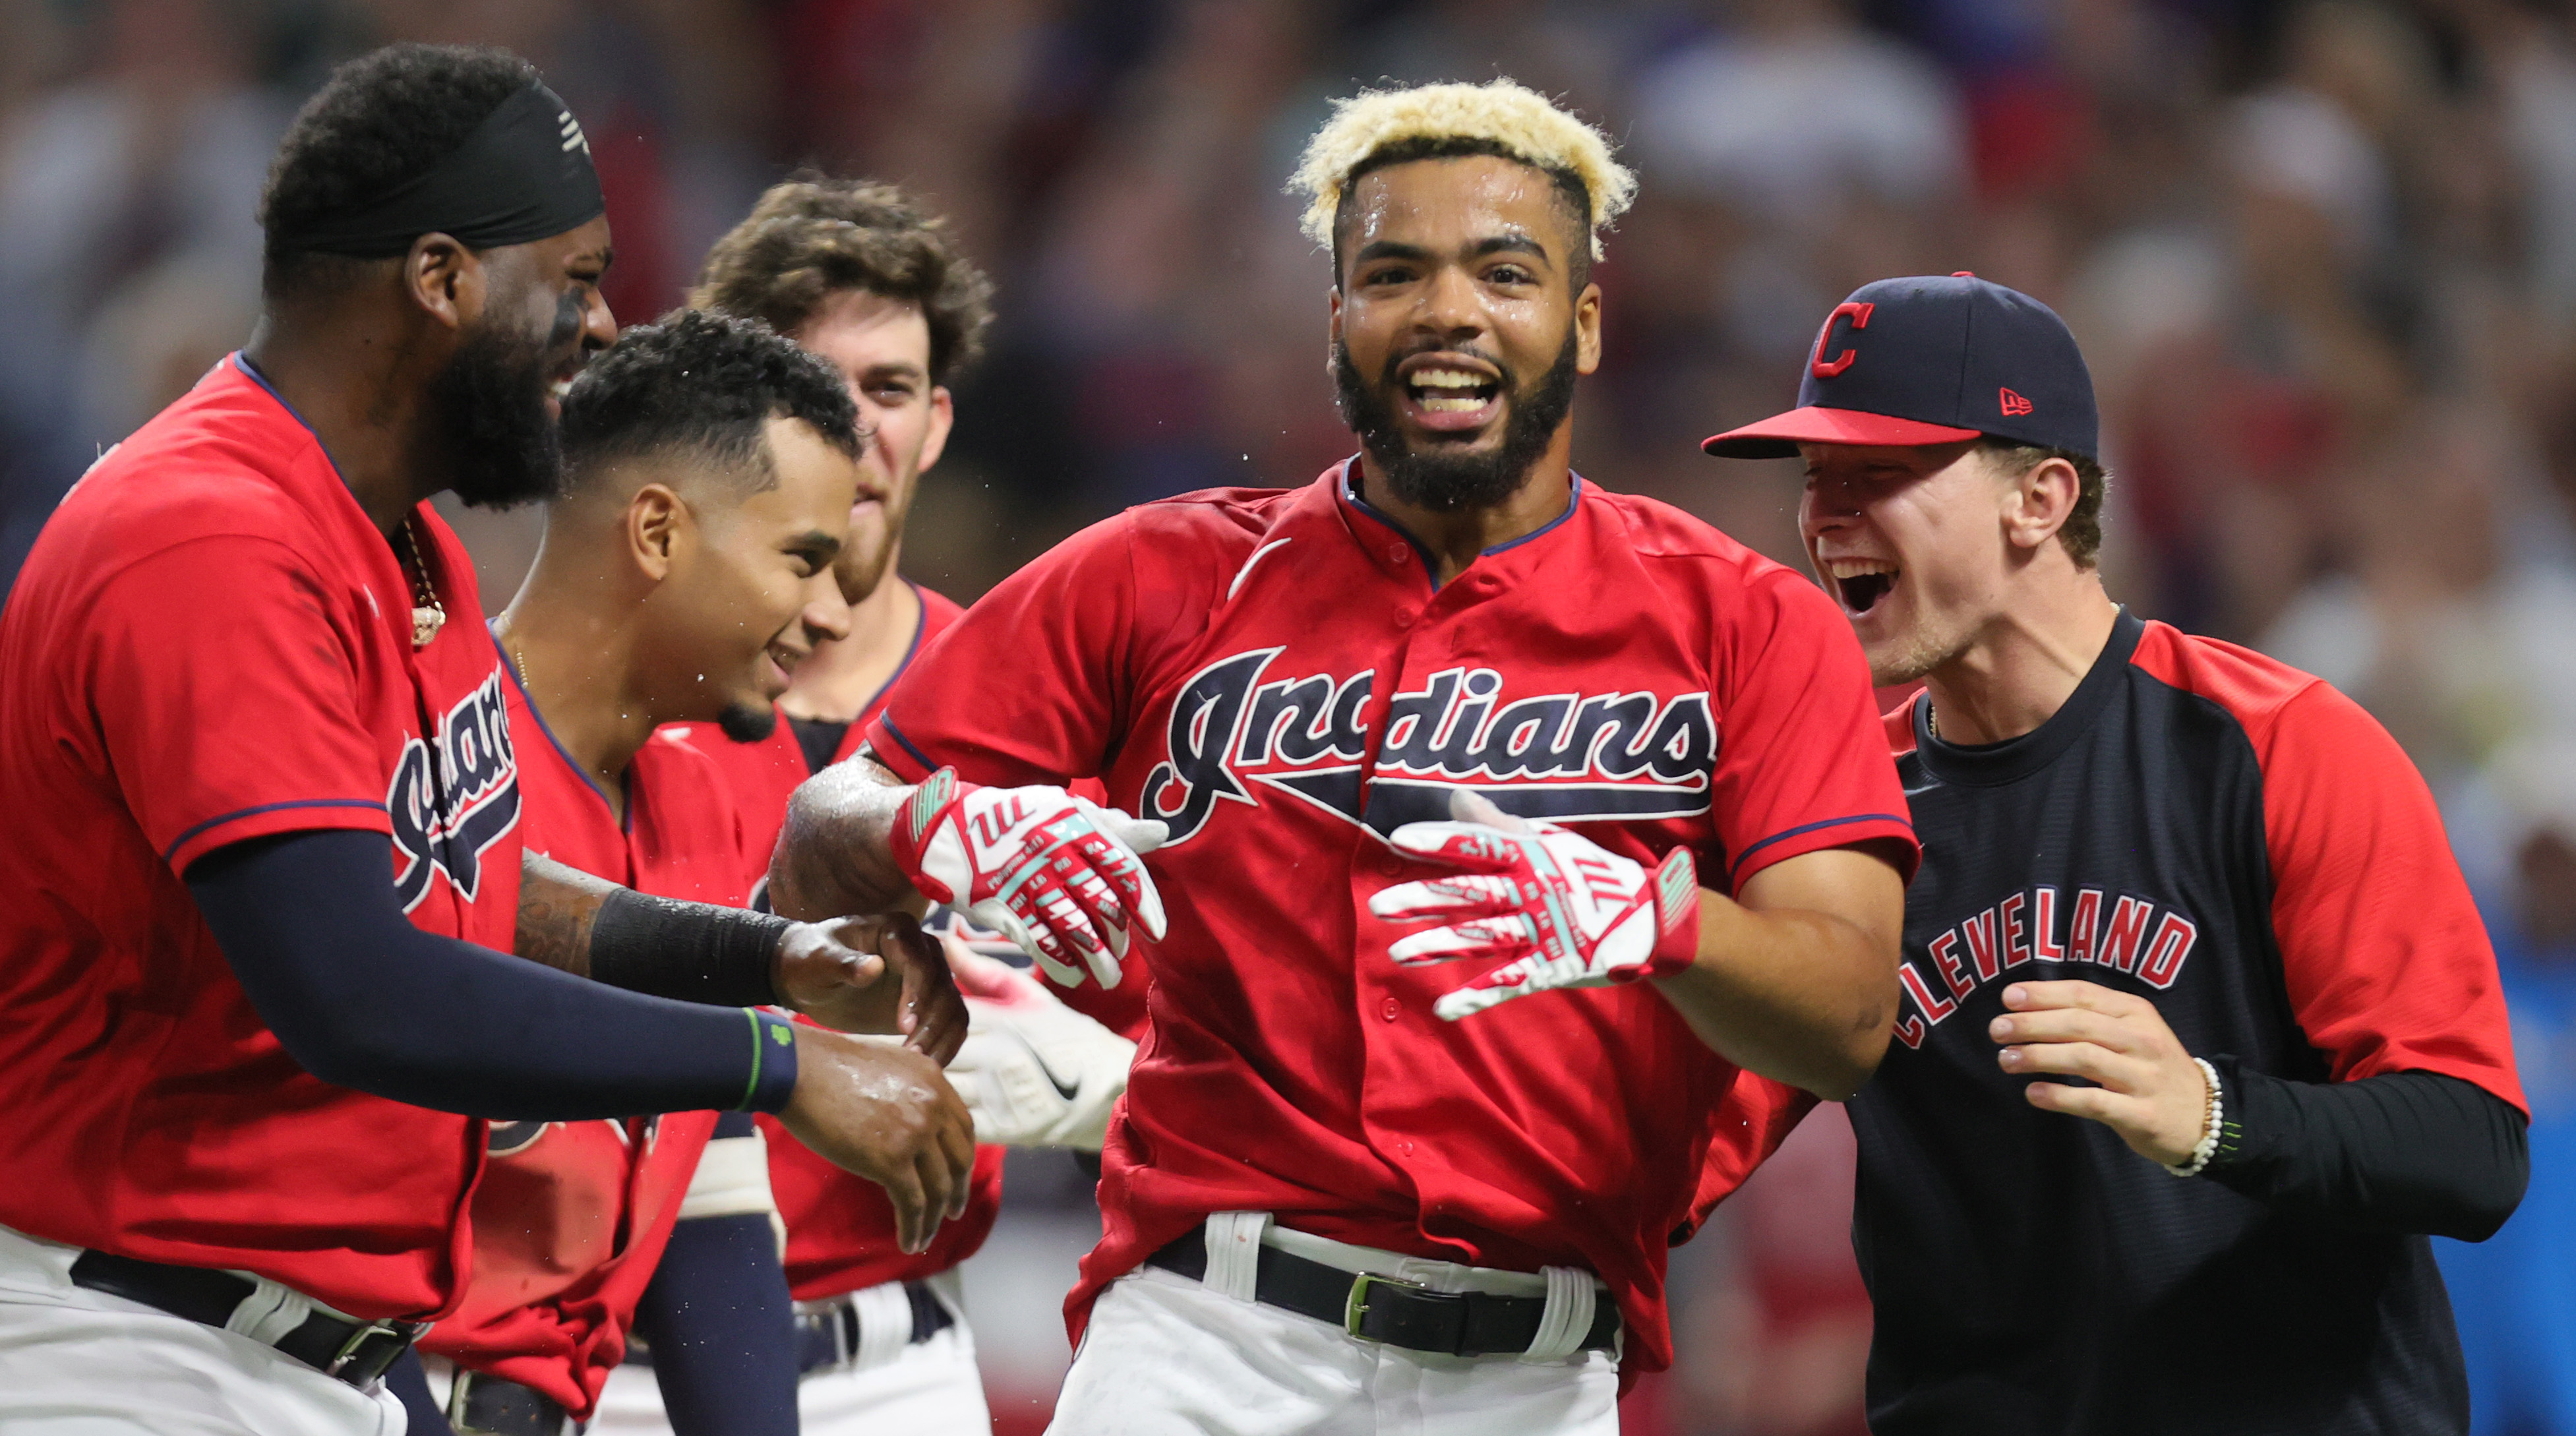 From Indians to Guardians, a look back at Clevelands 2021 baseball year